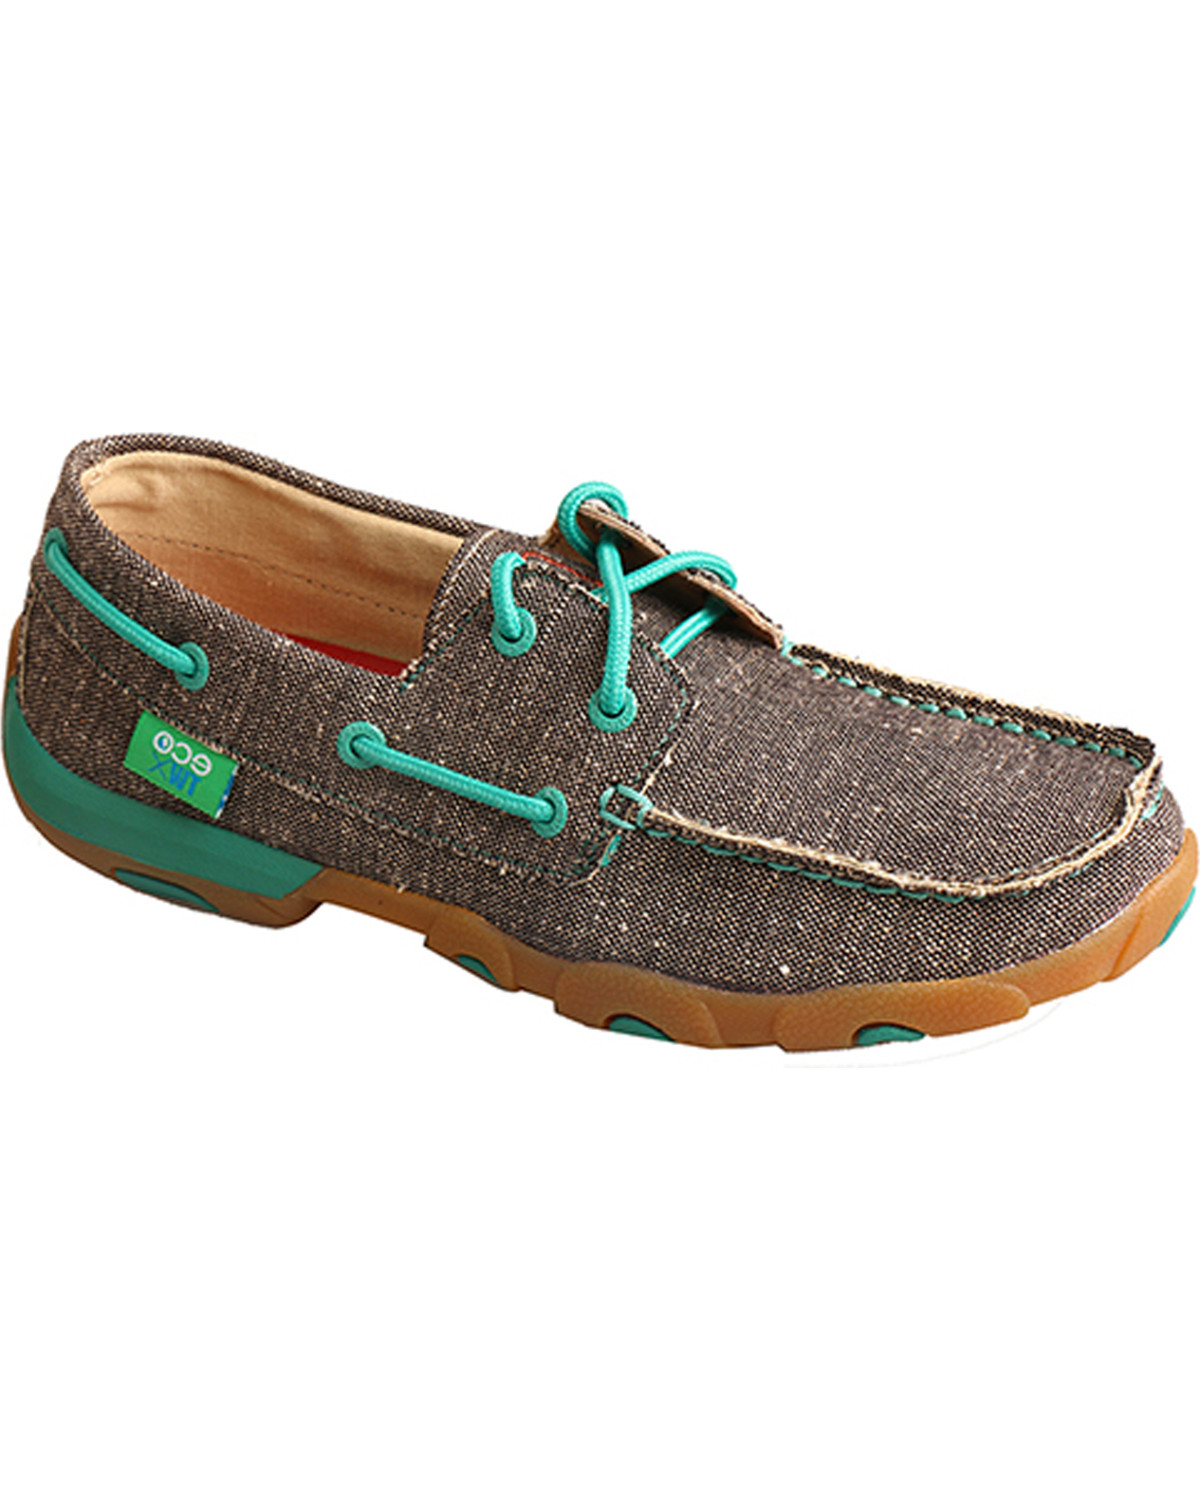 Twisted X Women's ECO Boat Shoe Driving Mocs